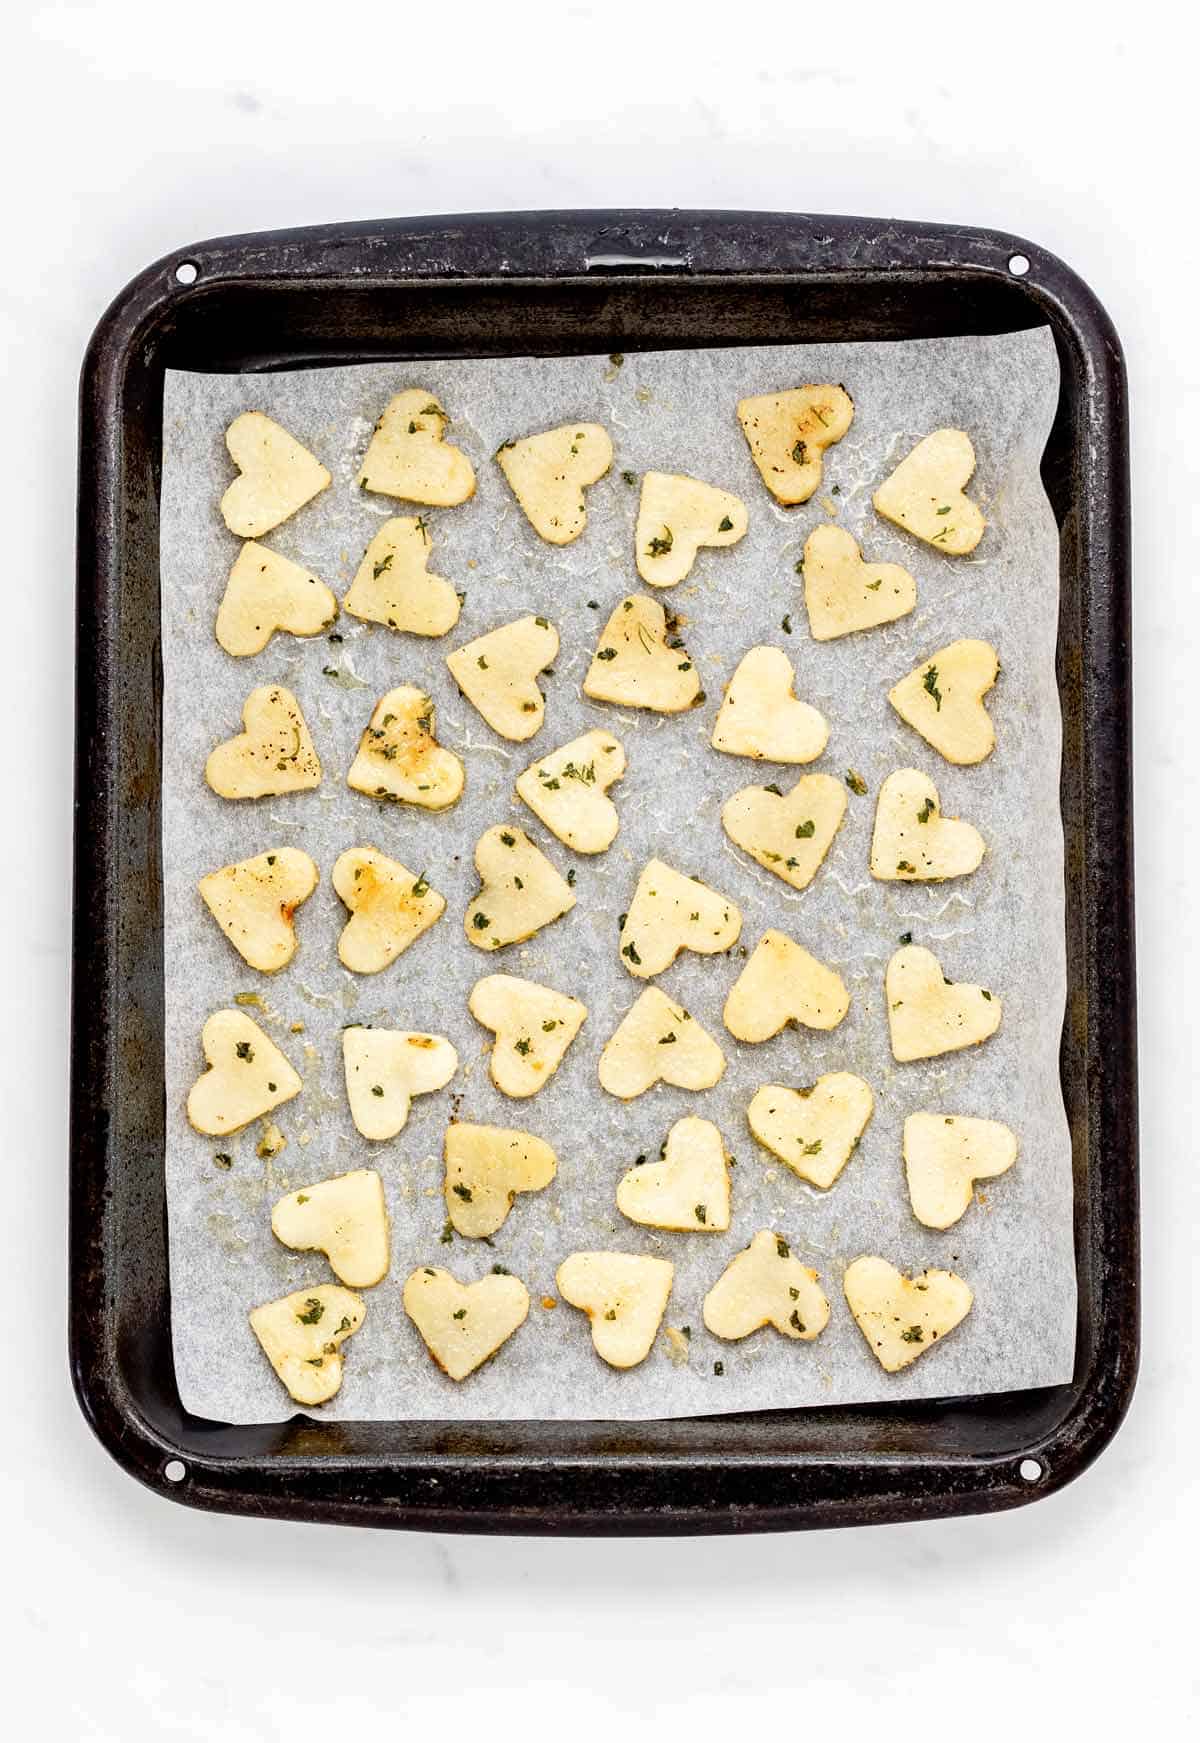 Heart shaped potato slices on a parchment paper lined baking sheet, prior to baking.